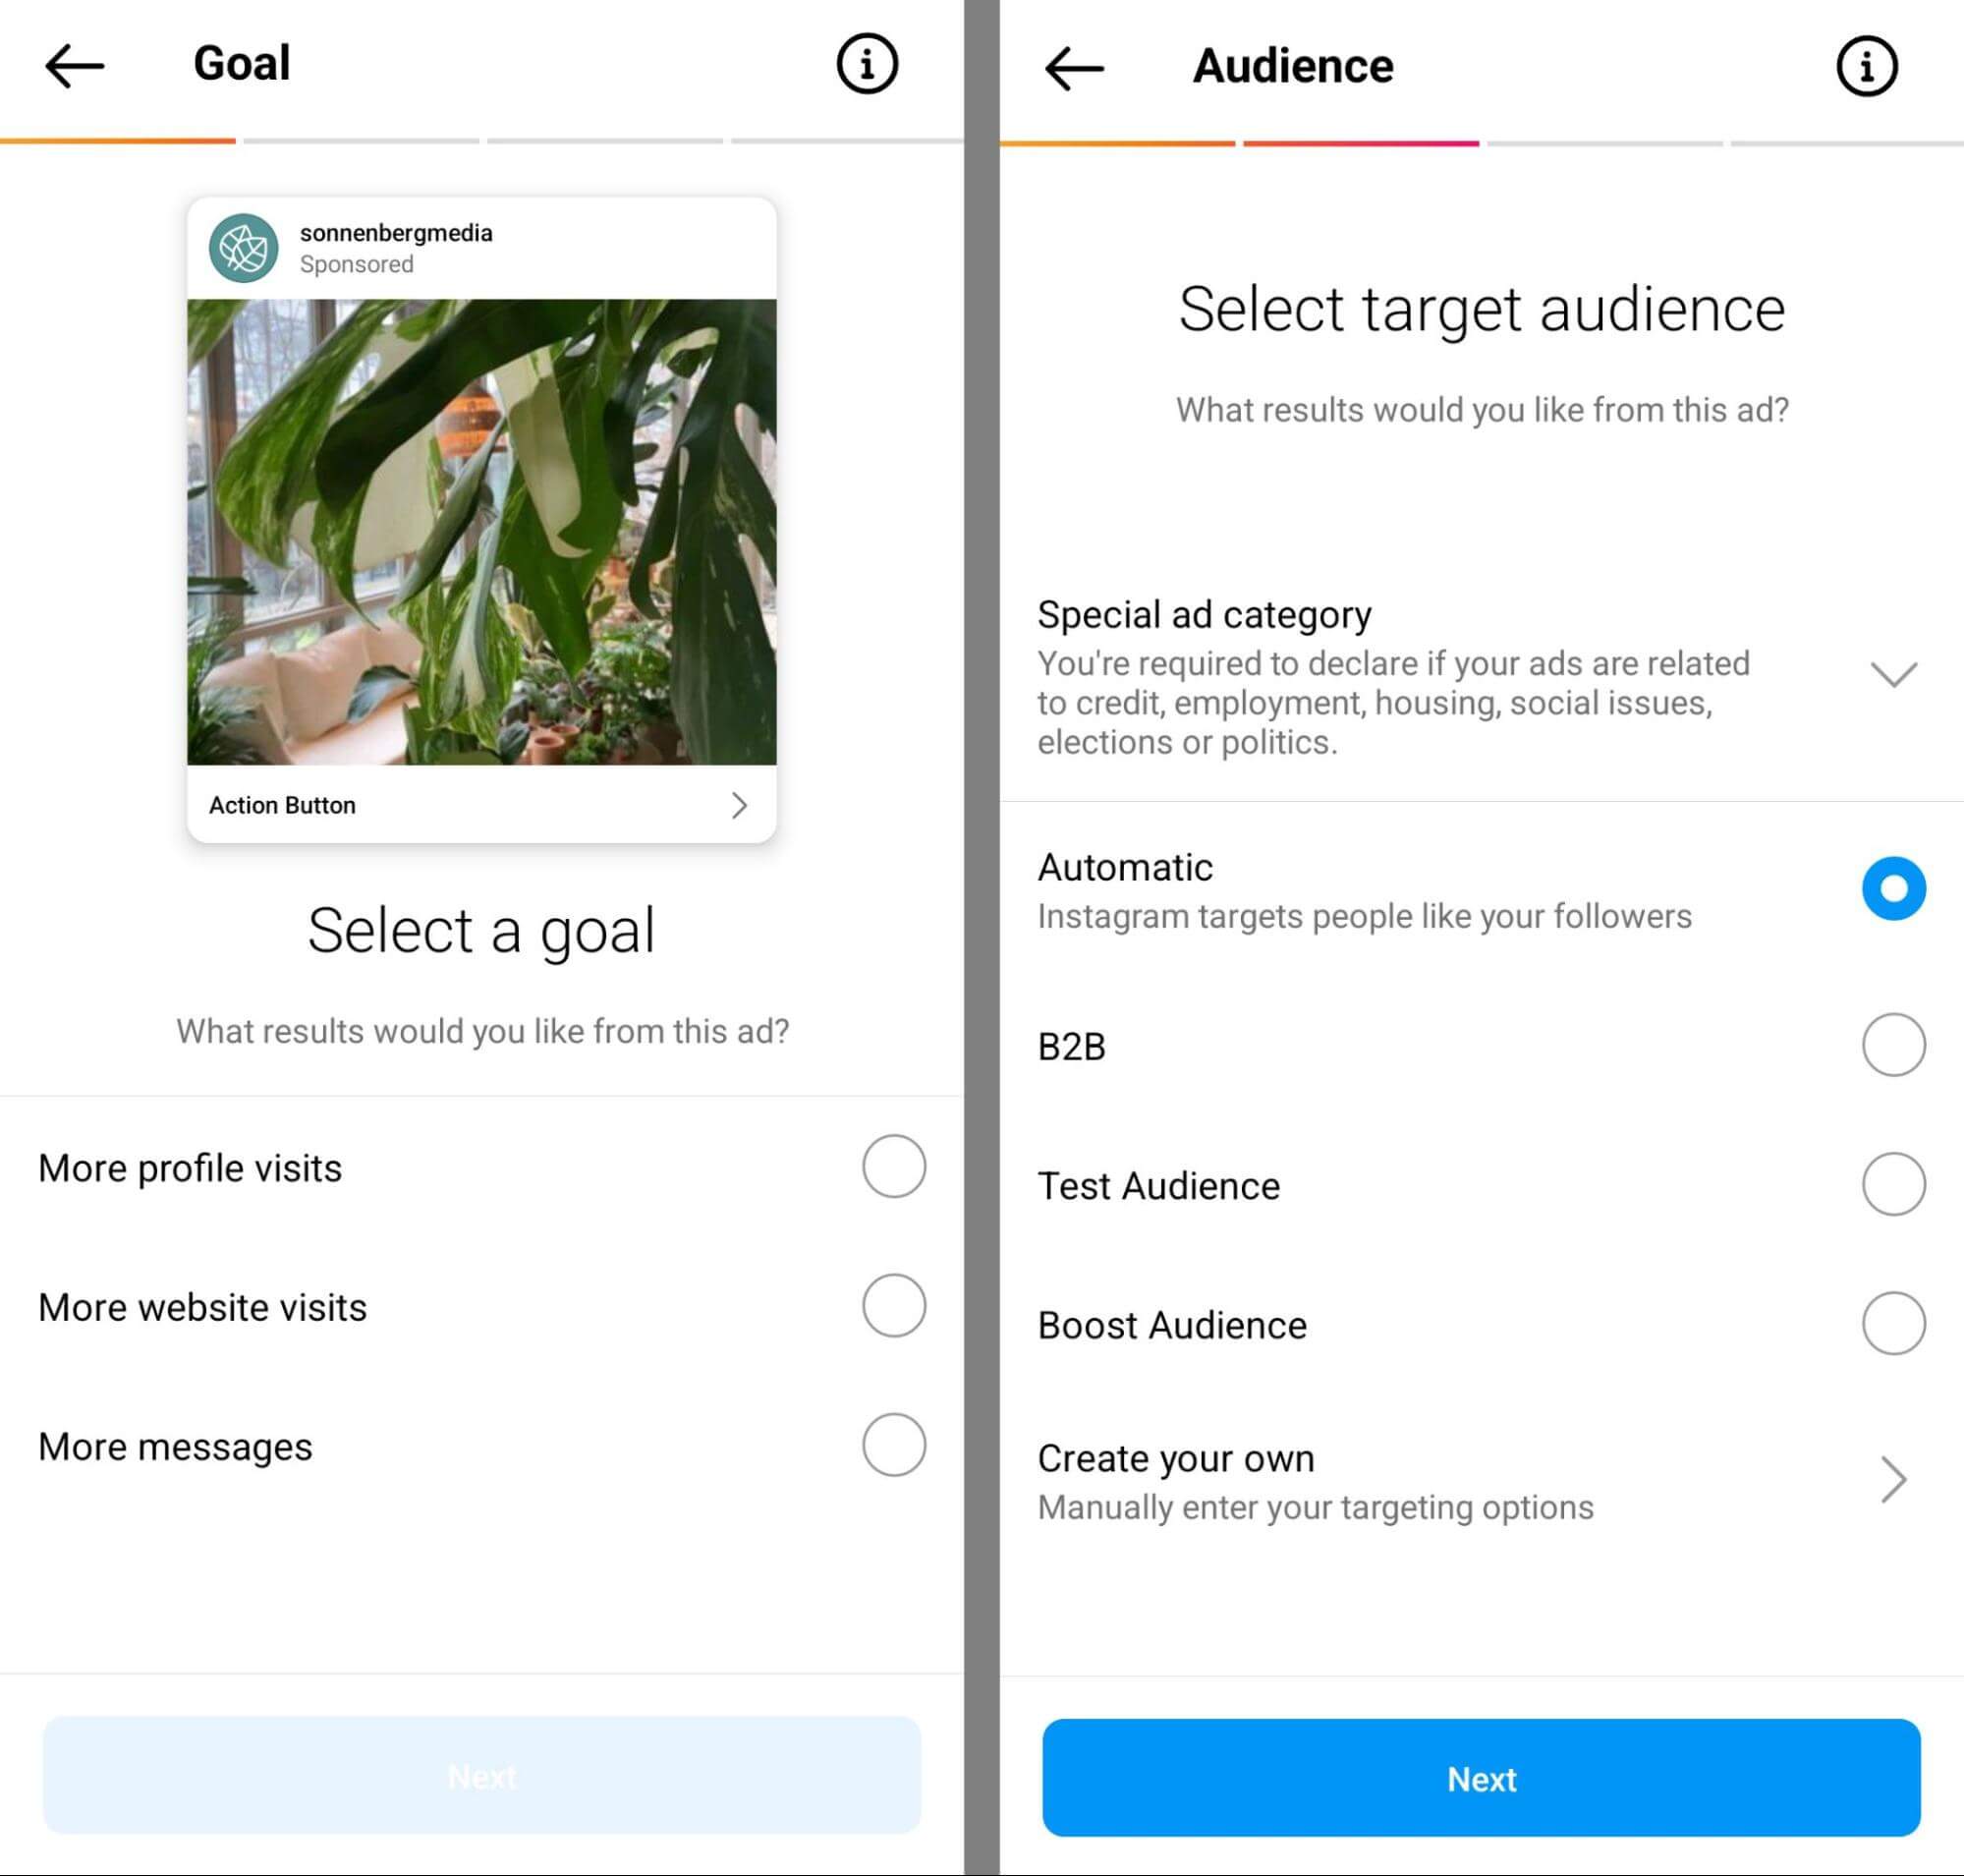 how-to-grow-your-emai-list-on-instagram-using-instagram-ads-boost-successful-organic-content-choose-goal-profile-visits-website-messages-example-14